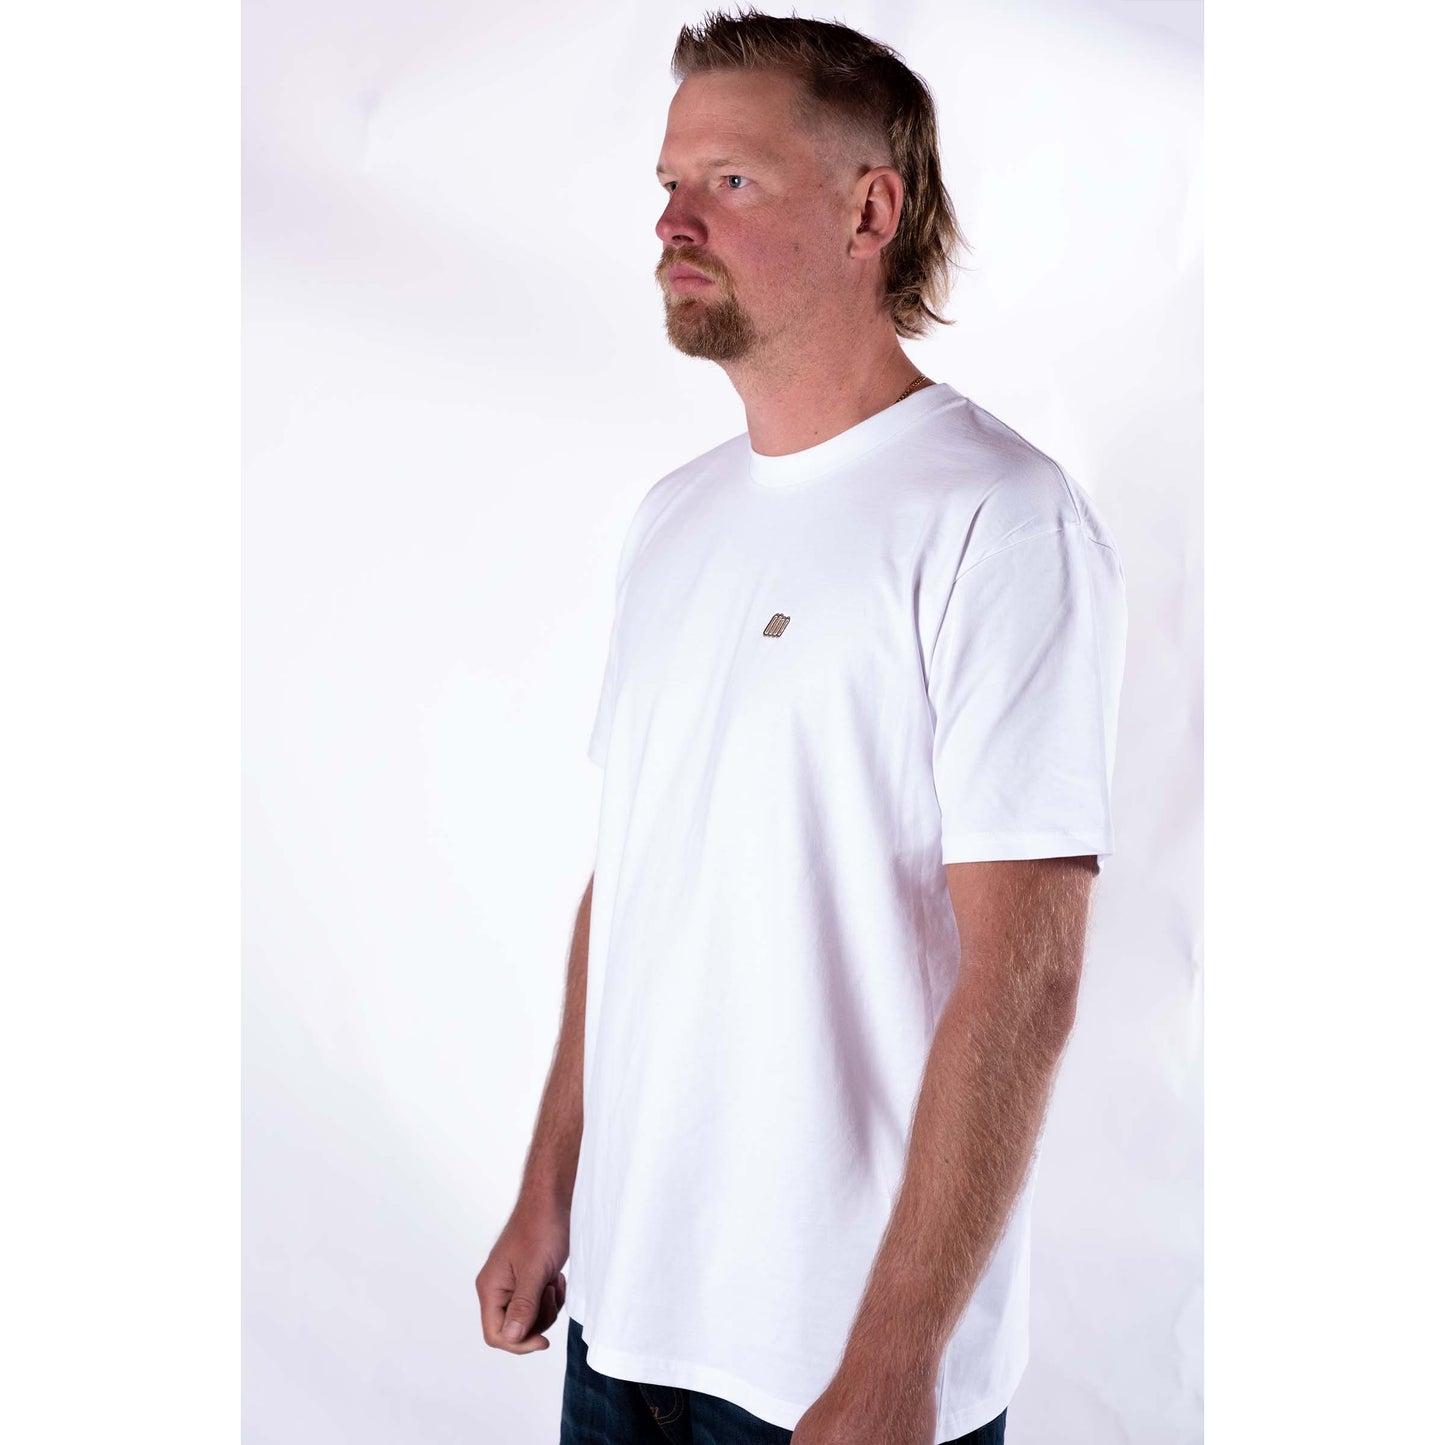 Essentials Tee - White (light brown embroidery) - Standard Fit